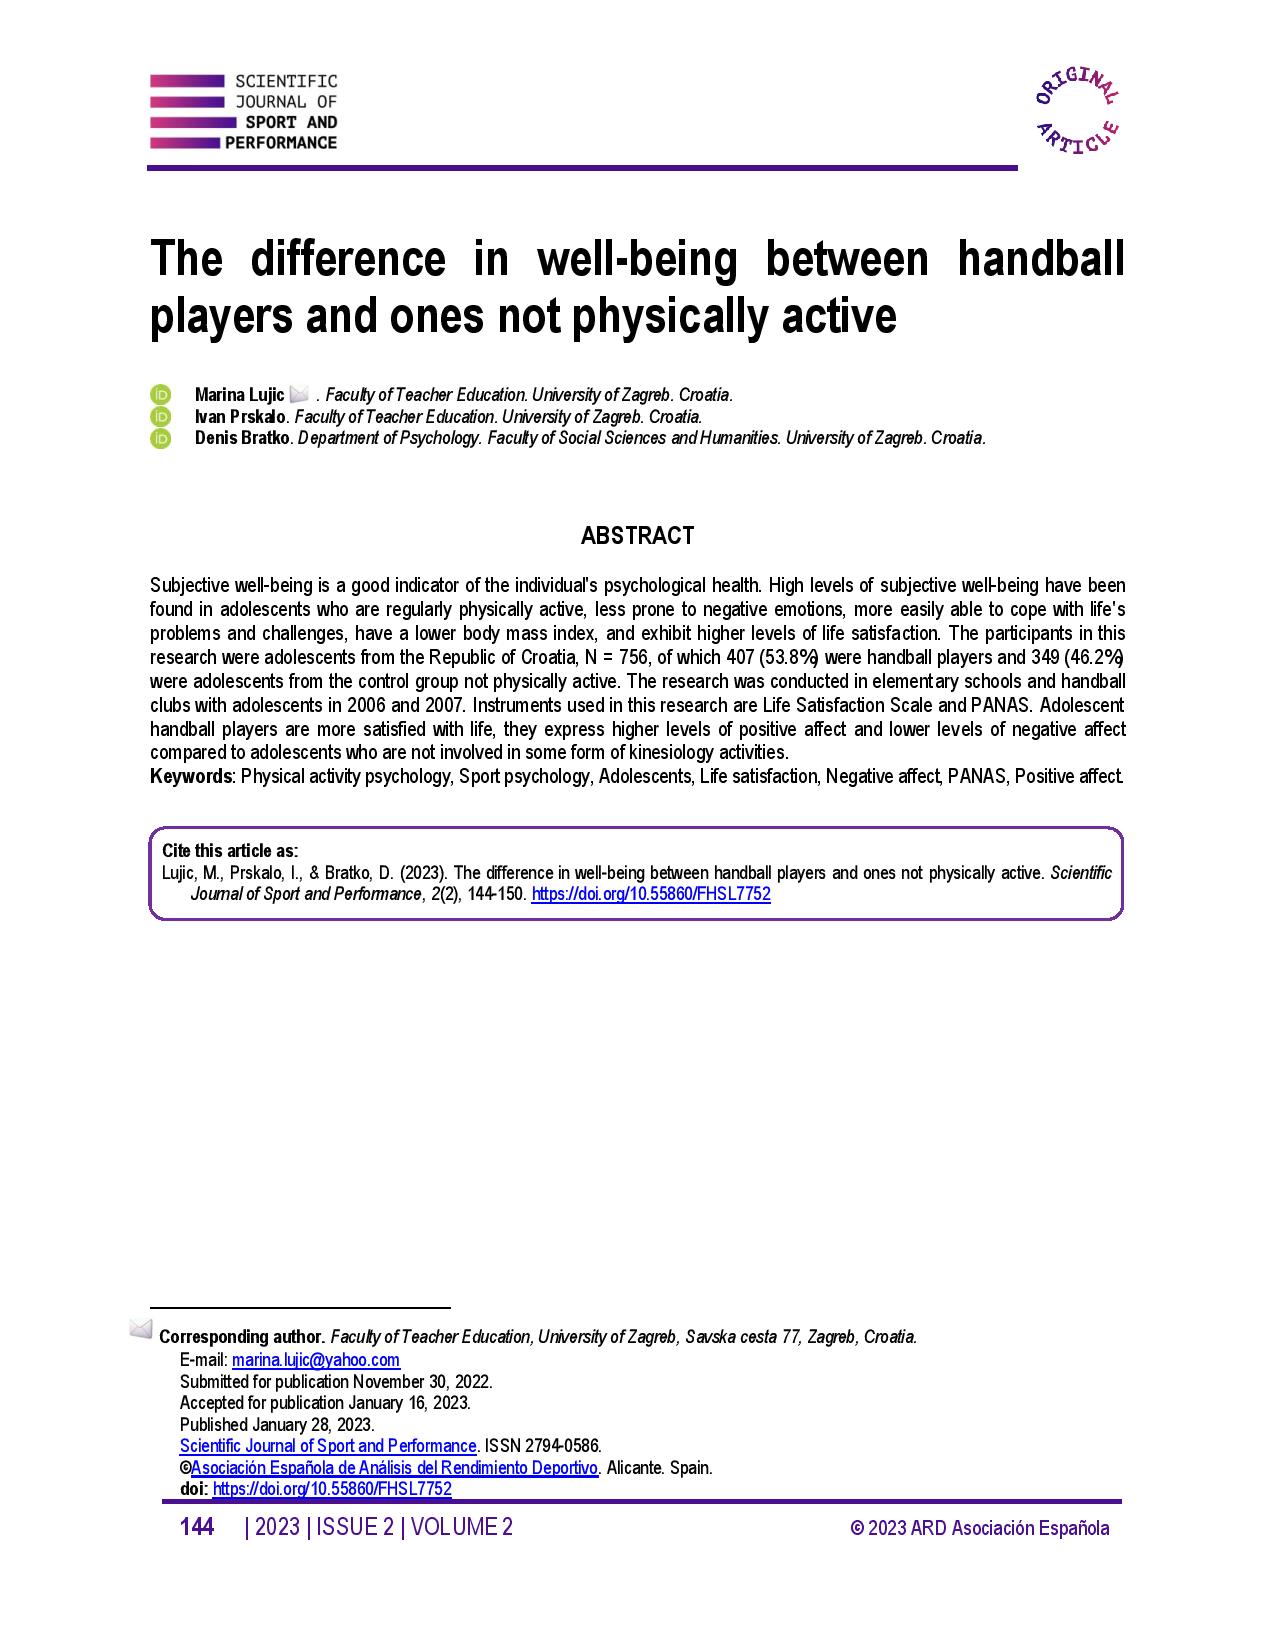 The difference in well-being between handball players and ones not physically active